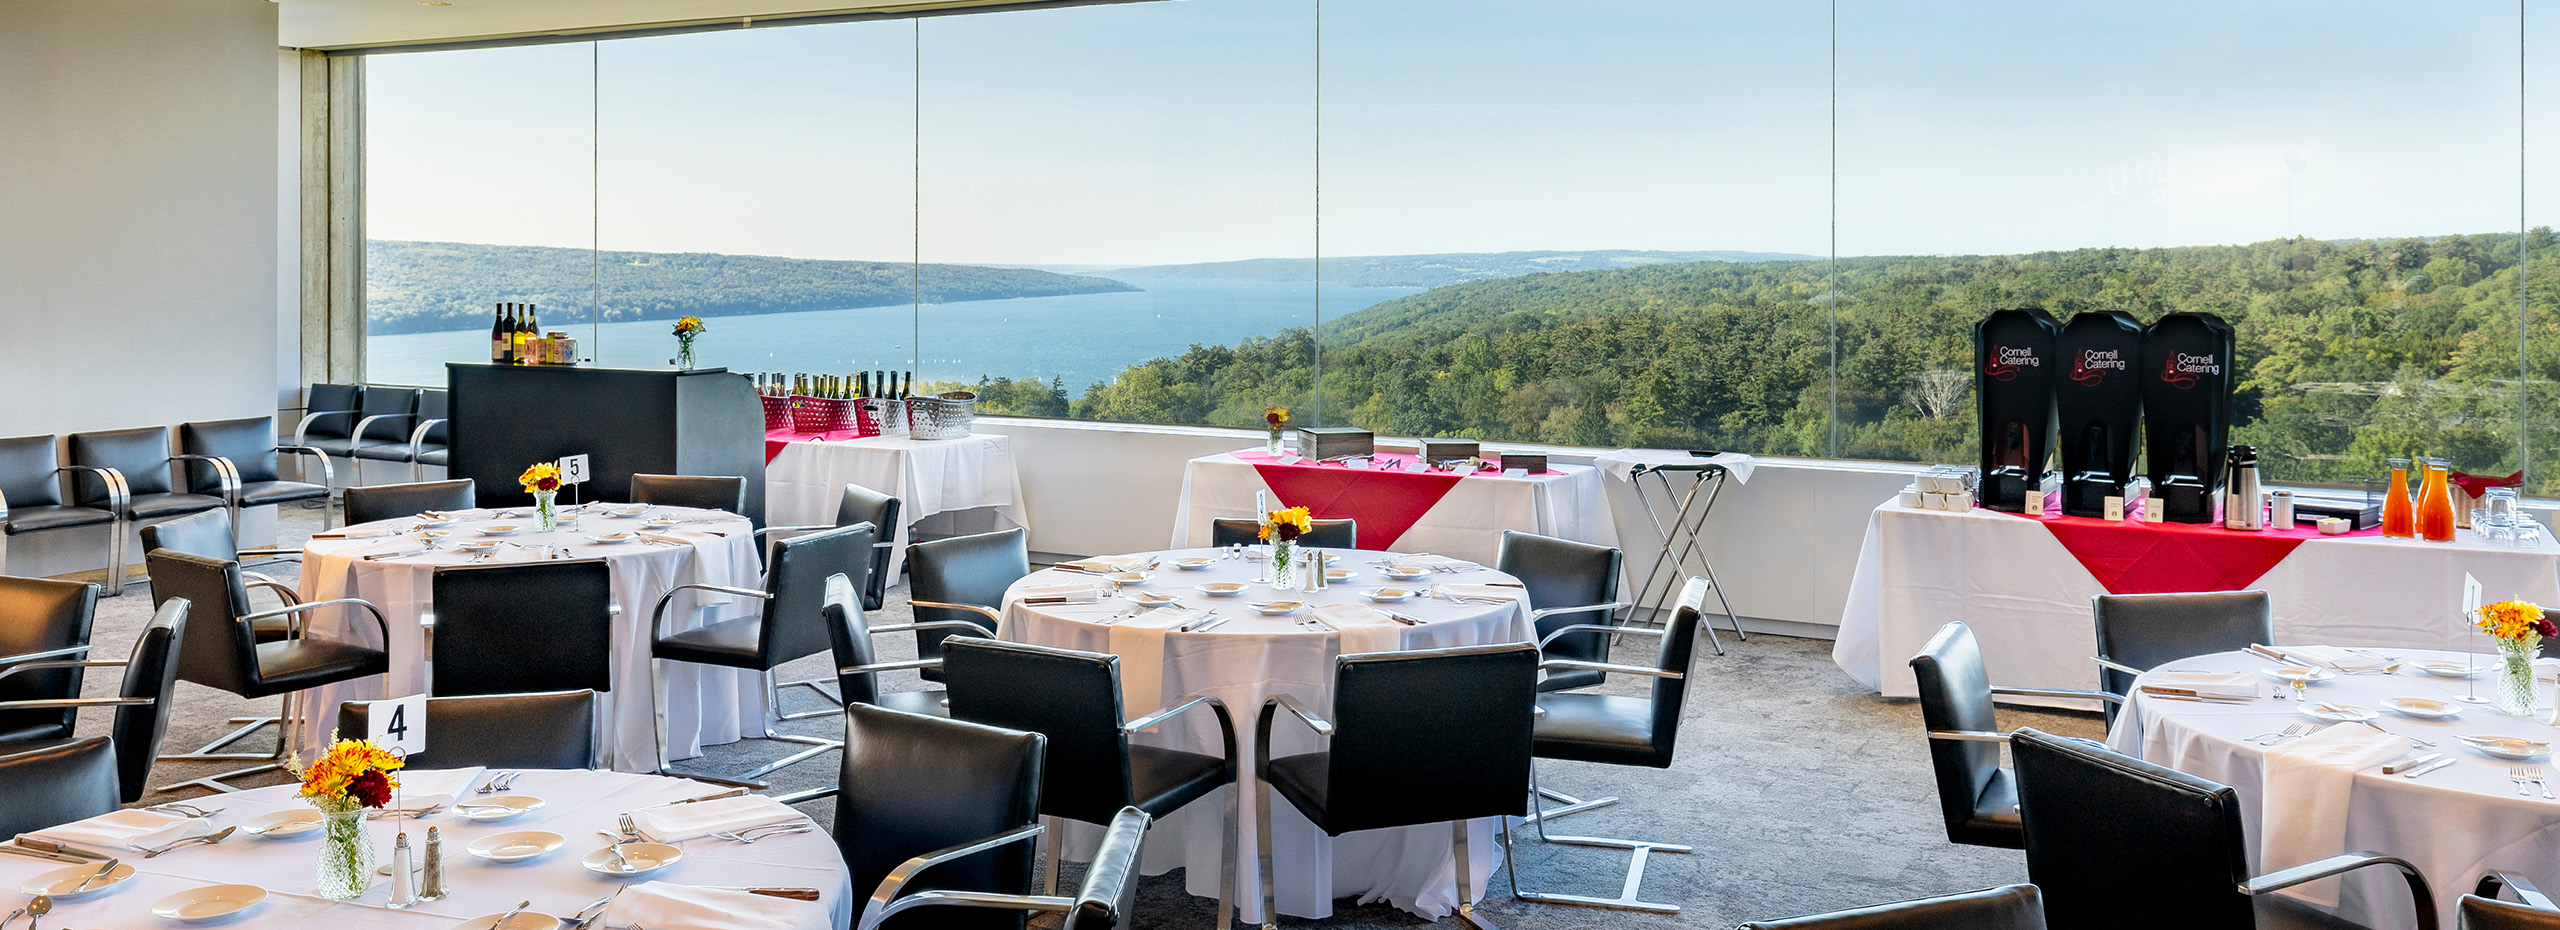 Round tables are set for a meal with black chairs in a large room with a lake view